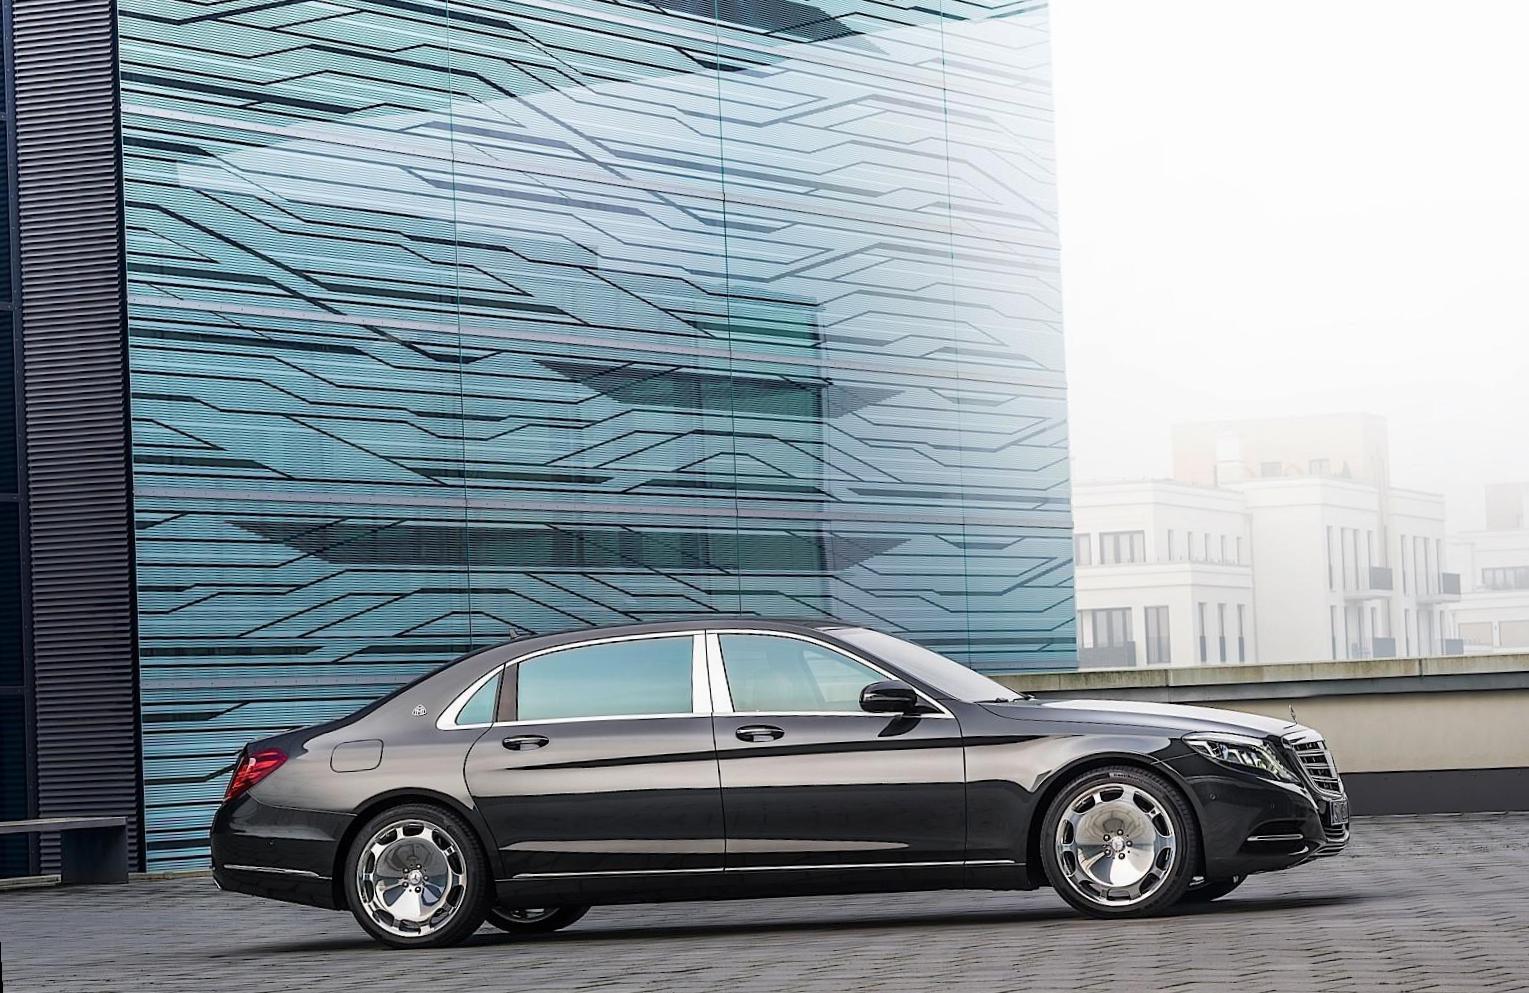 Mercedes Maybach S-Class Photos and Specs. Photo: Mercedes Maybach S ...